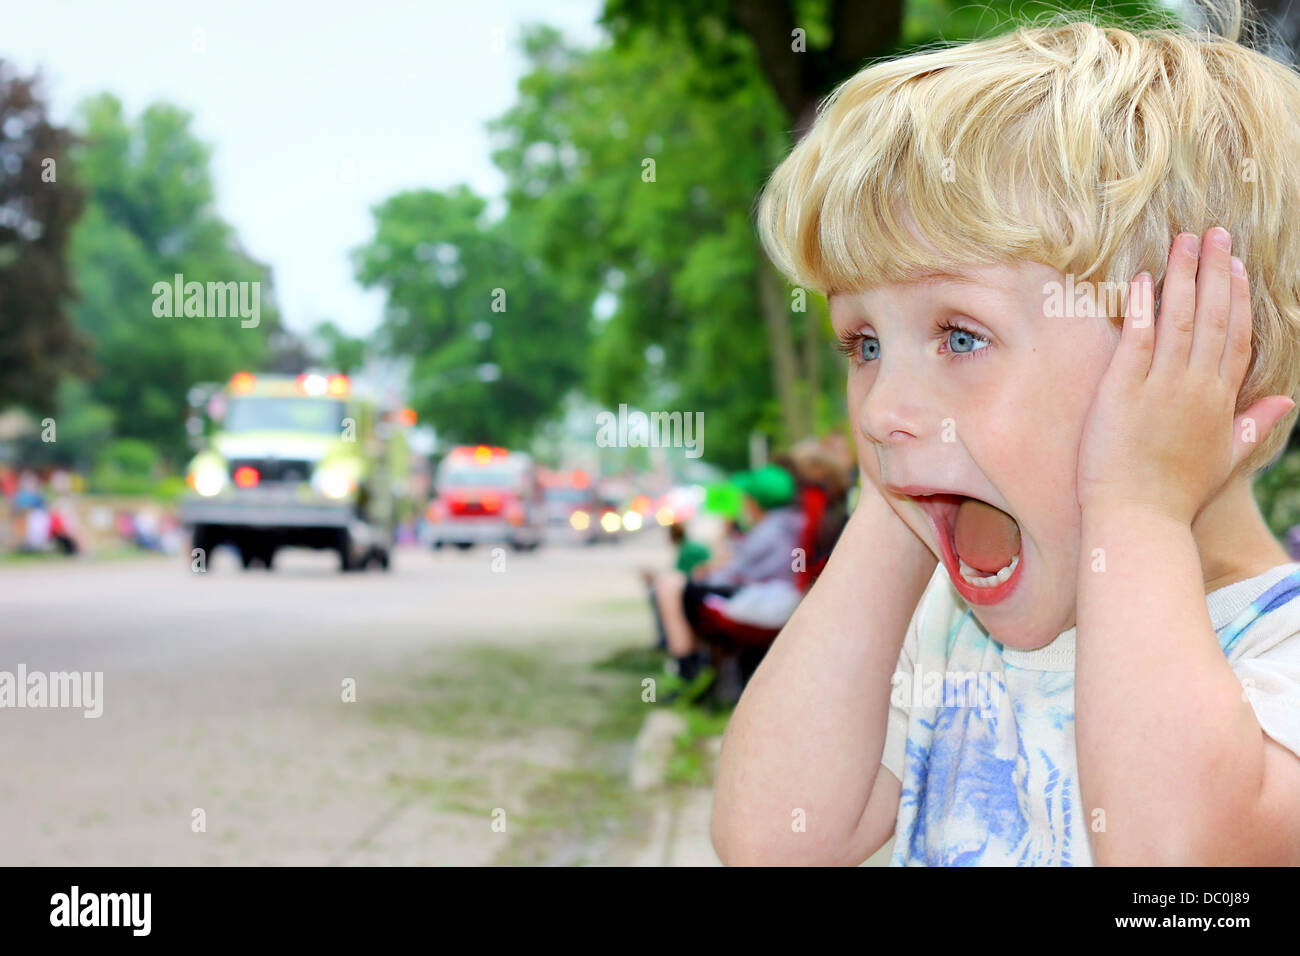 A young blonde boy covers his ears and looks excited as ambulances and fire trucks drive by in a parade. Stock Photo